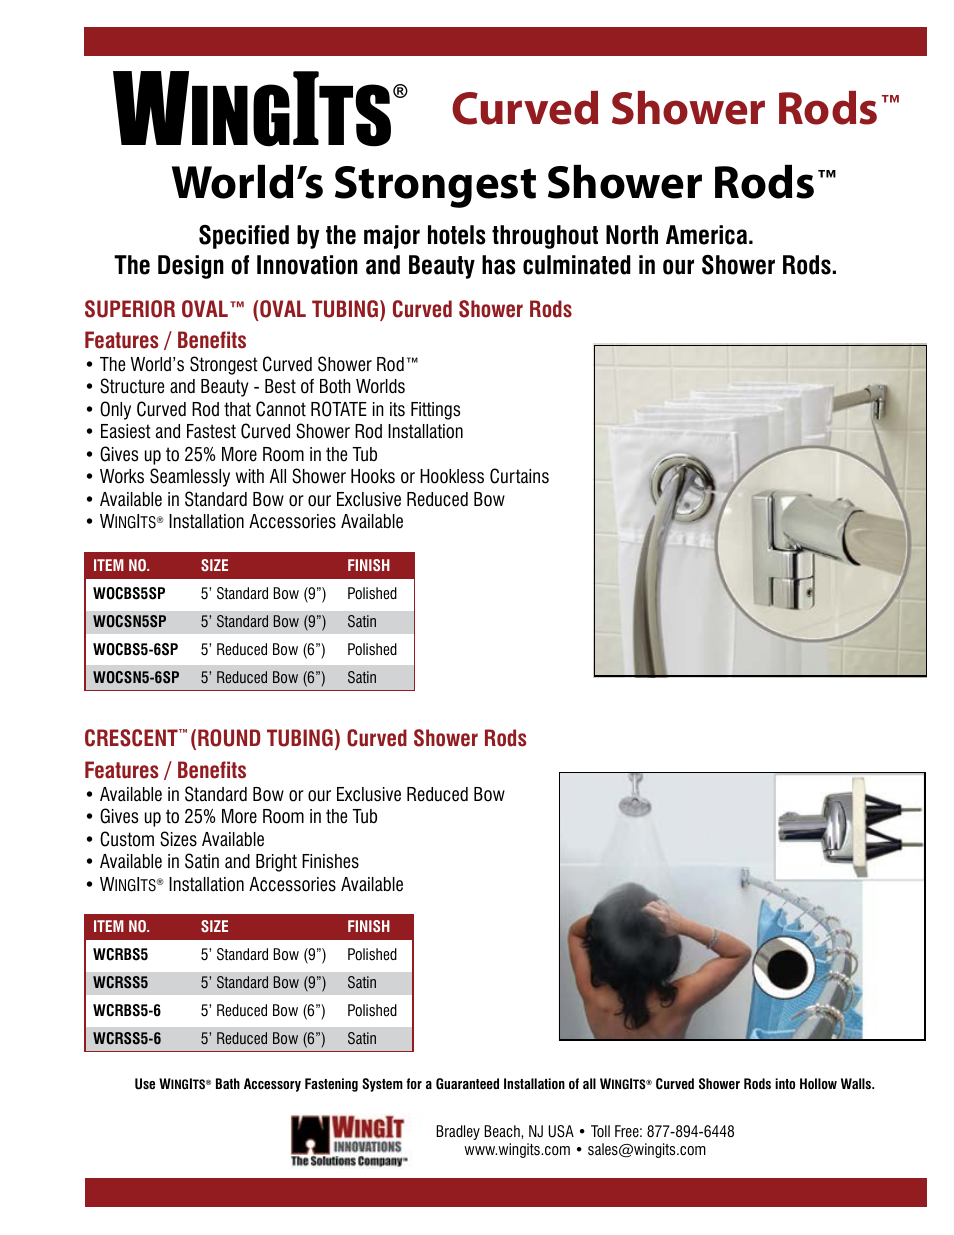 OVAL Curved Shower Rod WOCBS5SP